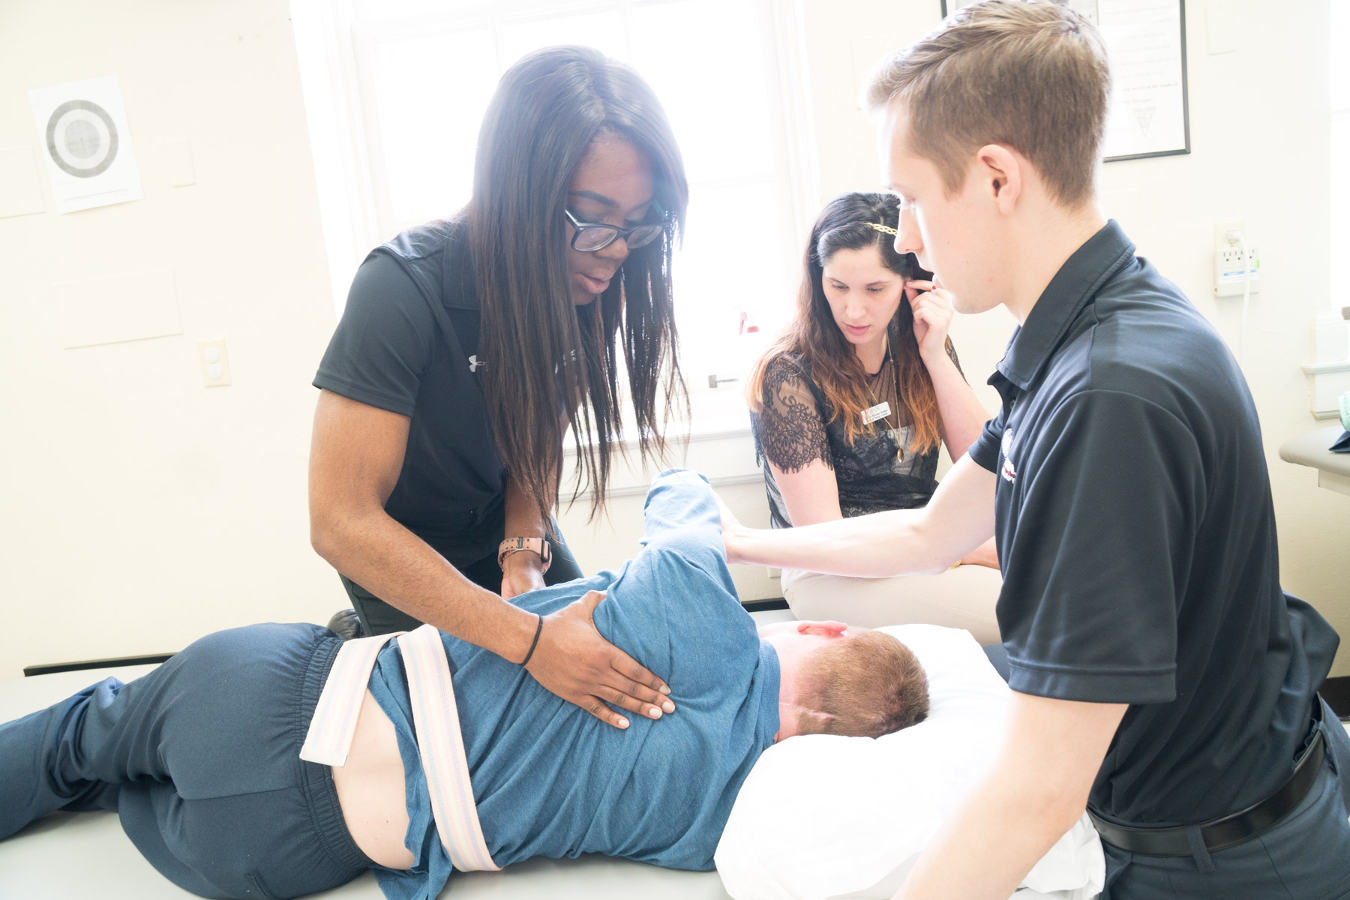 Physical therapy students concentrate on working with a patient